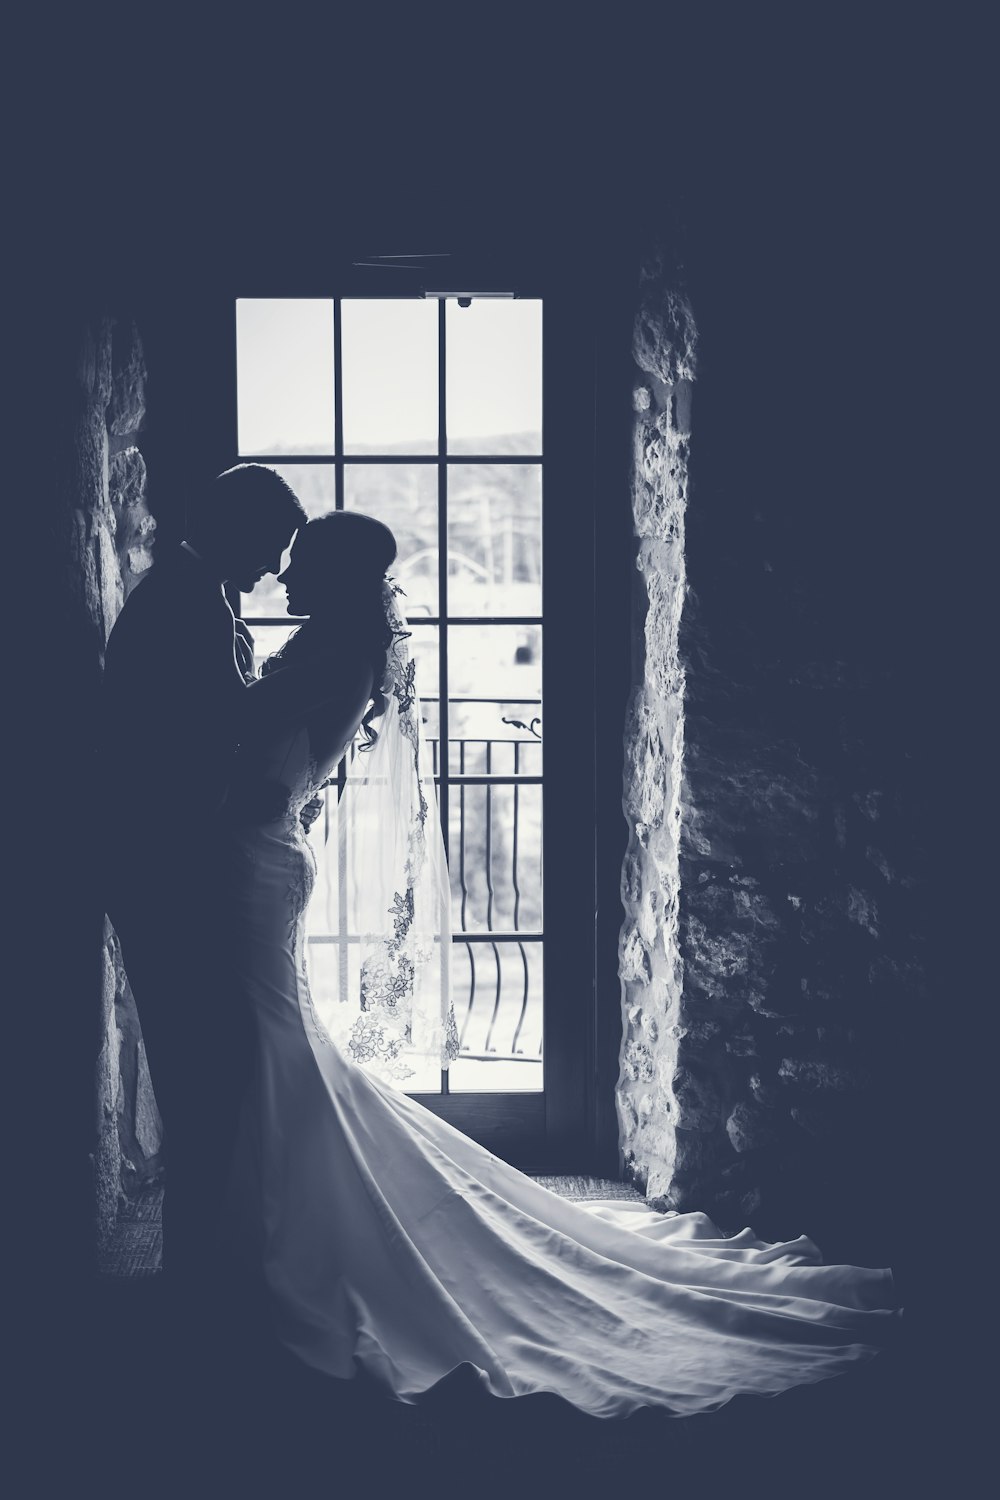 Sunlight streams through a doorway onto a just-married couple